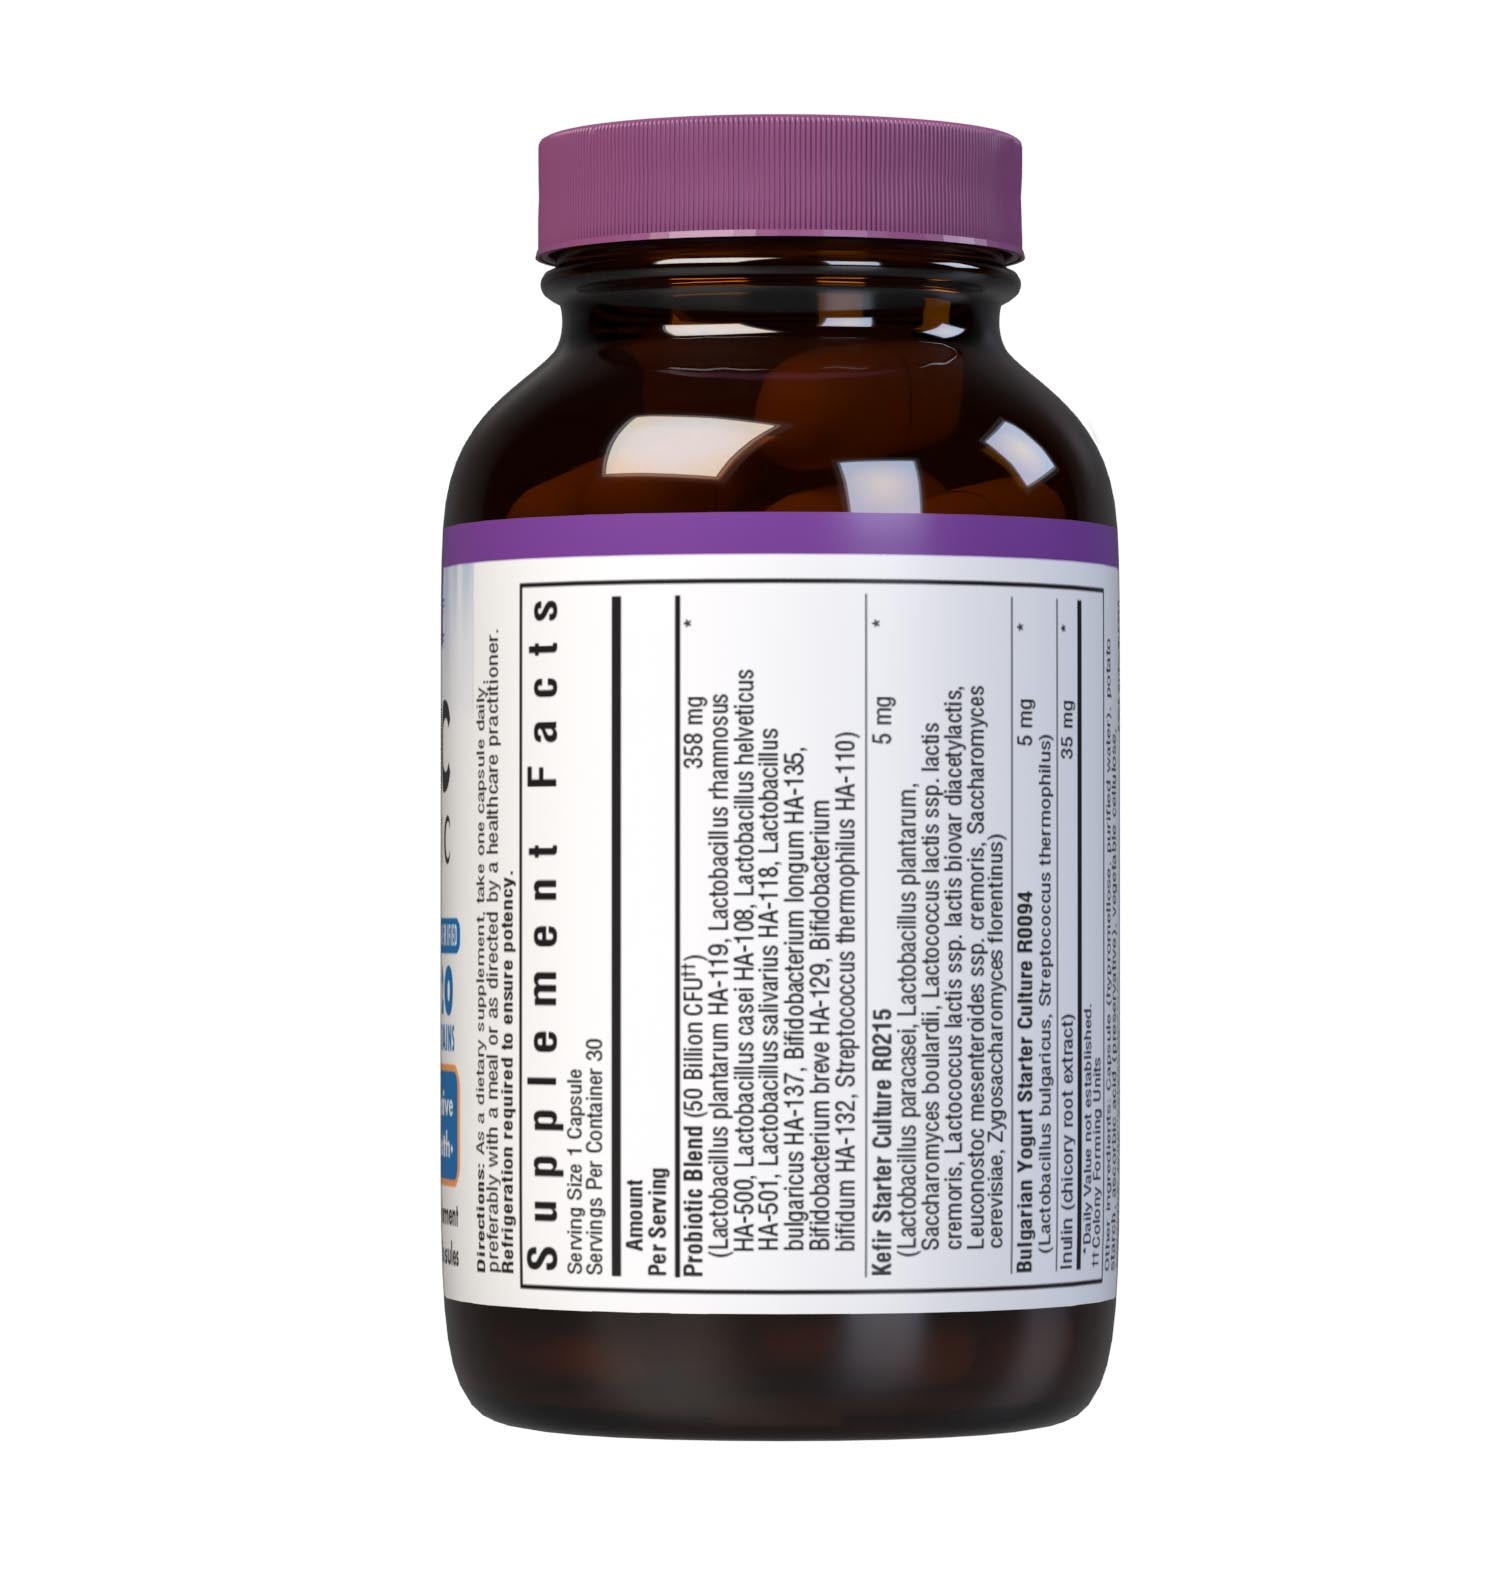 Bluebonnet’s Probiotic & Prebiotic 30 Vegetable Capsules are formulated with 50 billion viable cultures from 20 DNA-verified, scientifically supported strains. This unique, science-based probiotic formula includes the prebiotic inulin from chicory root extract, to assist the growth of friendly bacterium in the gut. Supplement facts panel top. #size_30 count